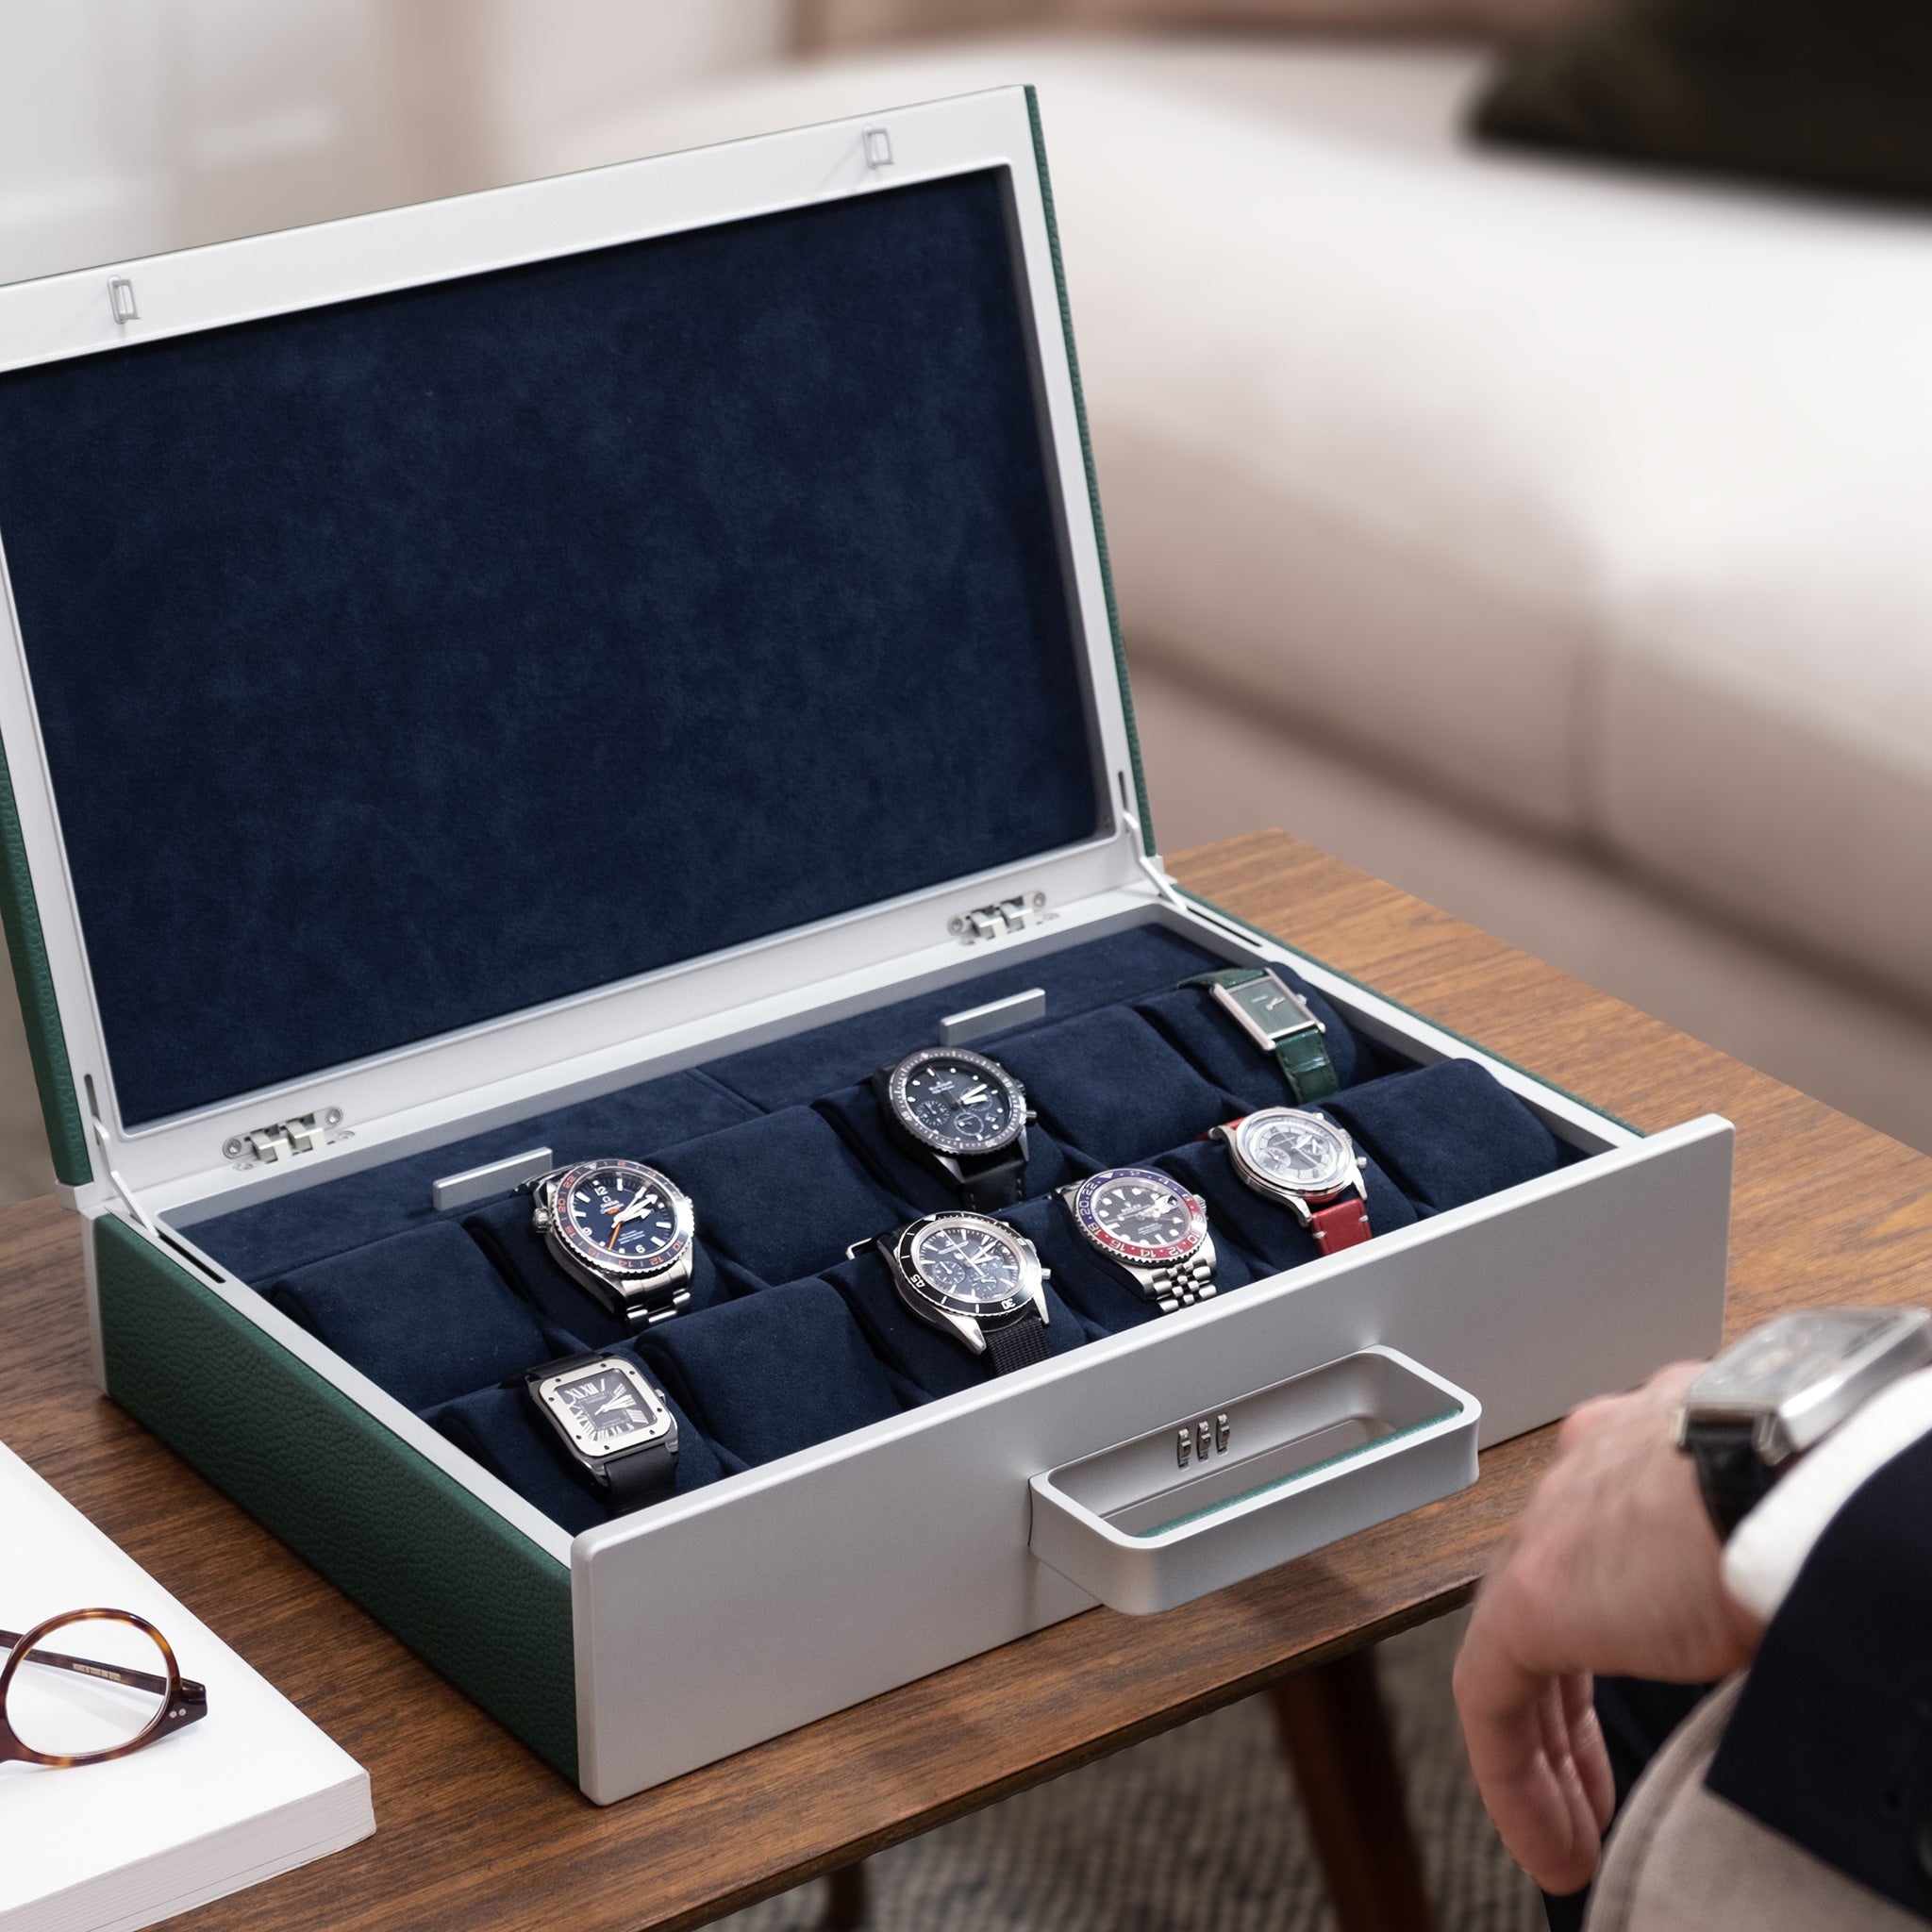 Lifestyle shot of open Mackenzie 12 Watch briefcase in carbon fiber and grey anodized aluminum casing, emerald leather and soft deep blue Alcantara made by hand filled with luxury watches including Rolex, Jaeger-LeCoultre, Blancpain and Omega